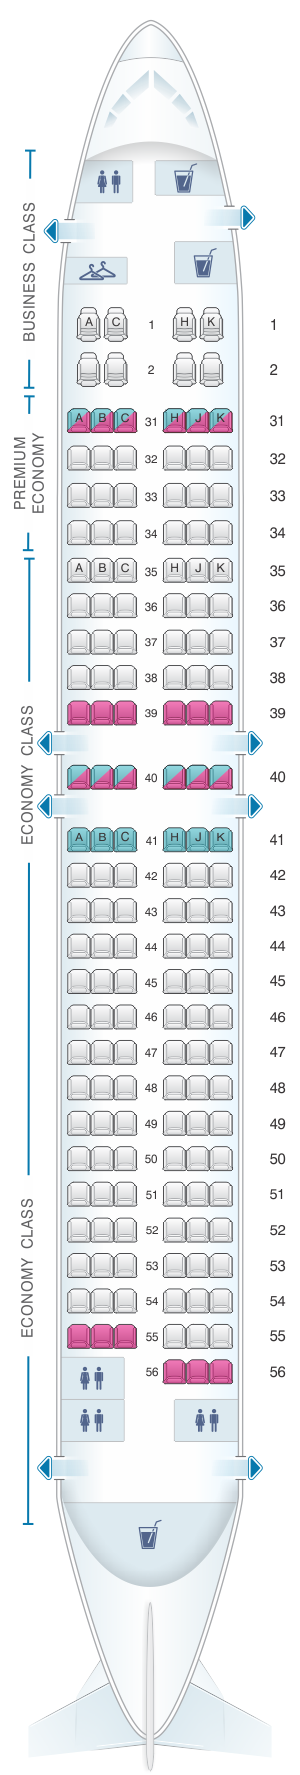 Seat map for China Southern Airlines Boeing B737 800 Layout B